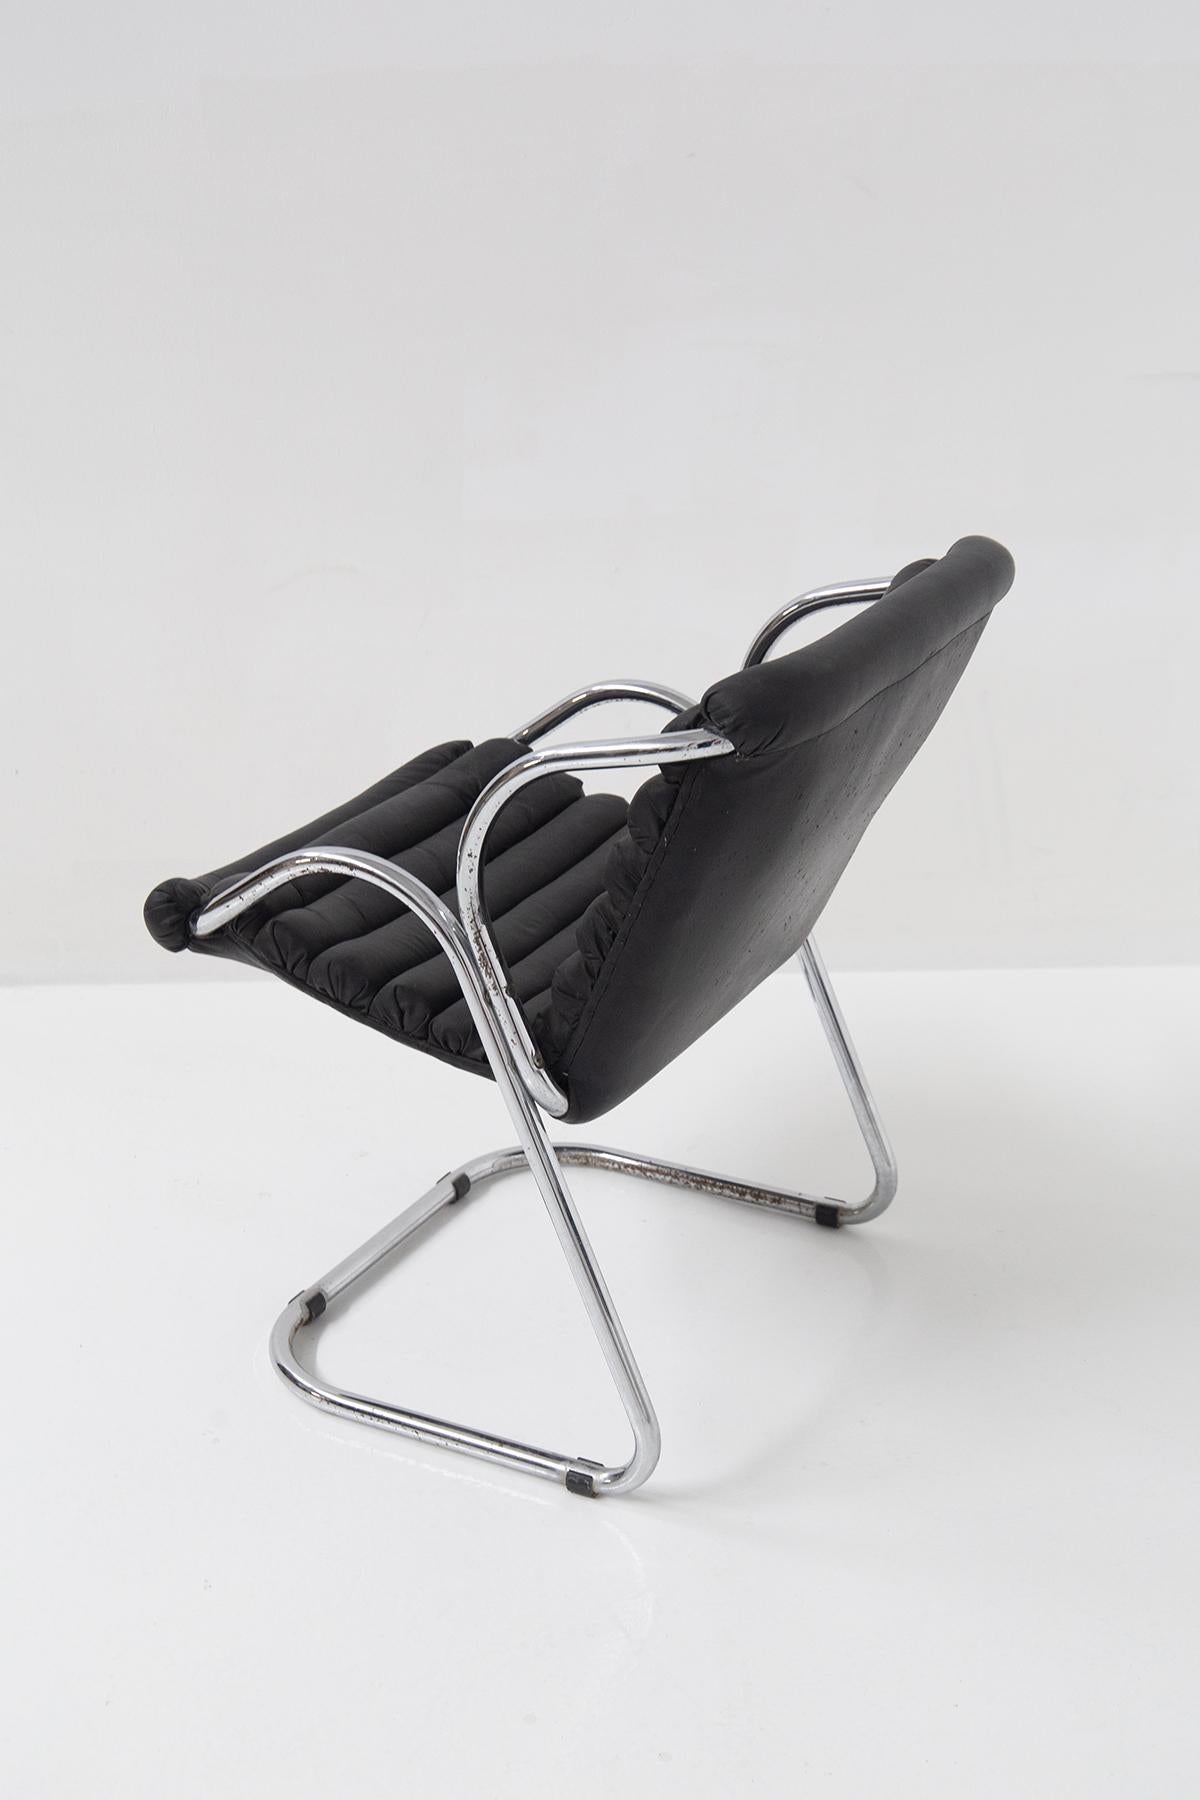 Whimsical Mid-Century Chairs in Black Leather For Sale 2